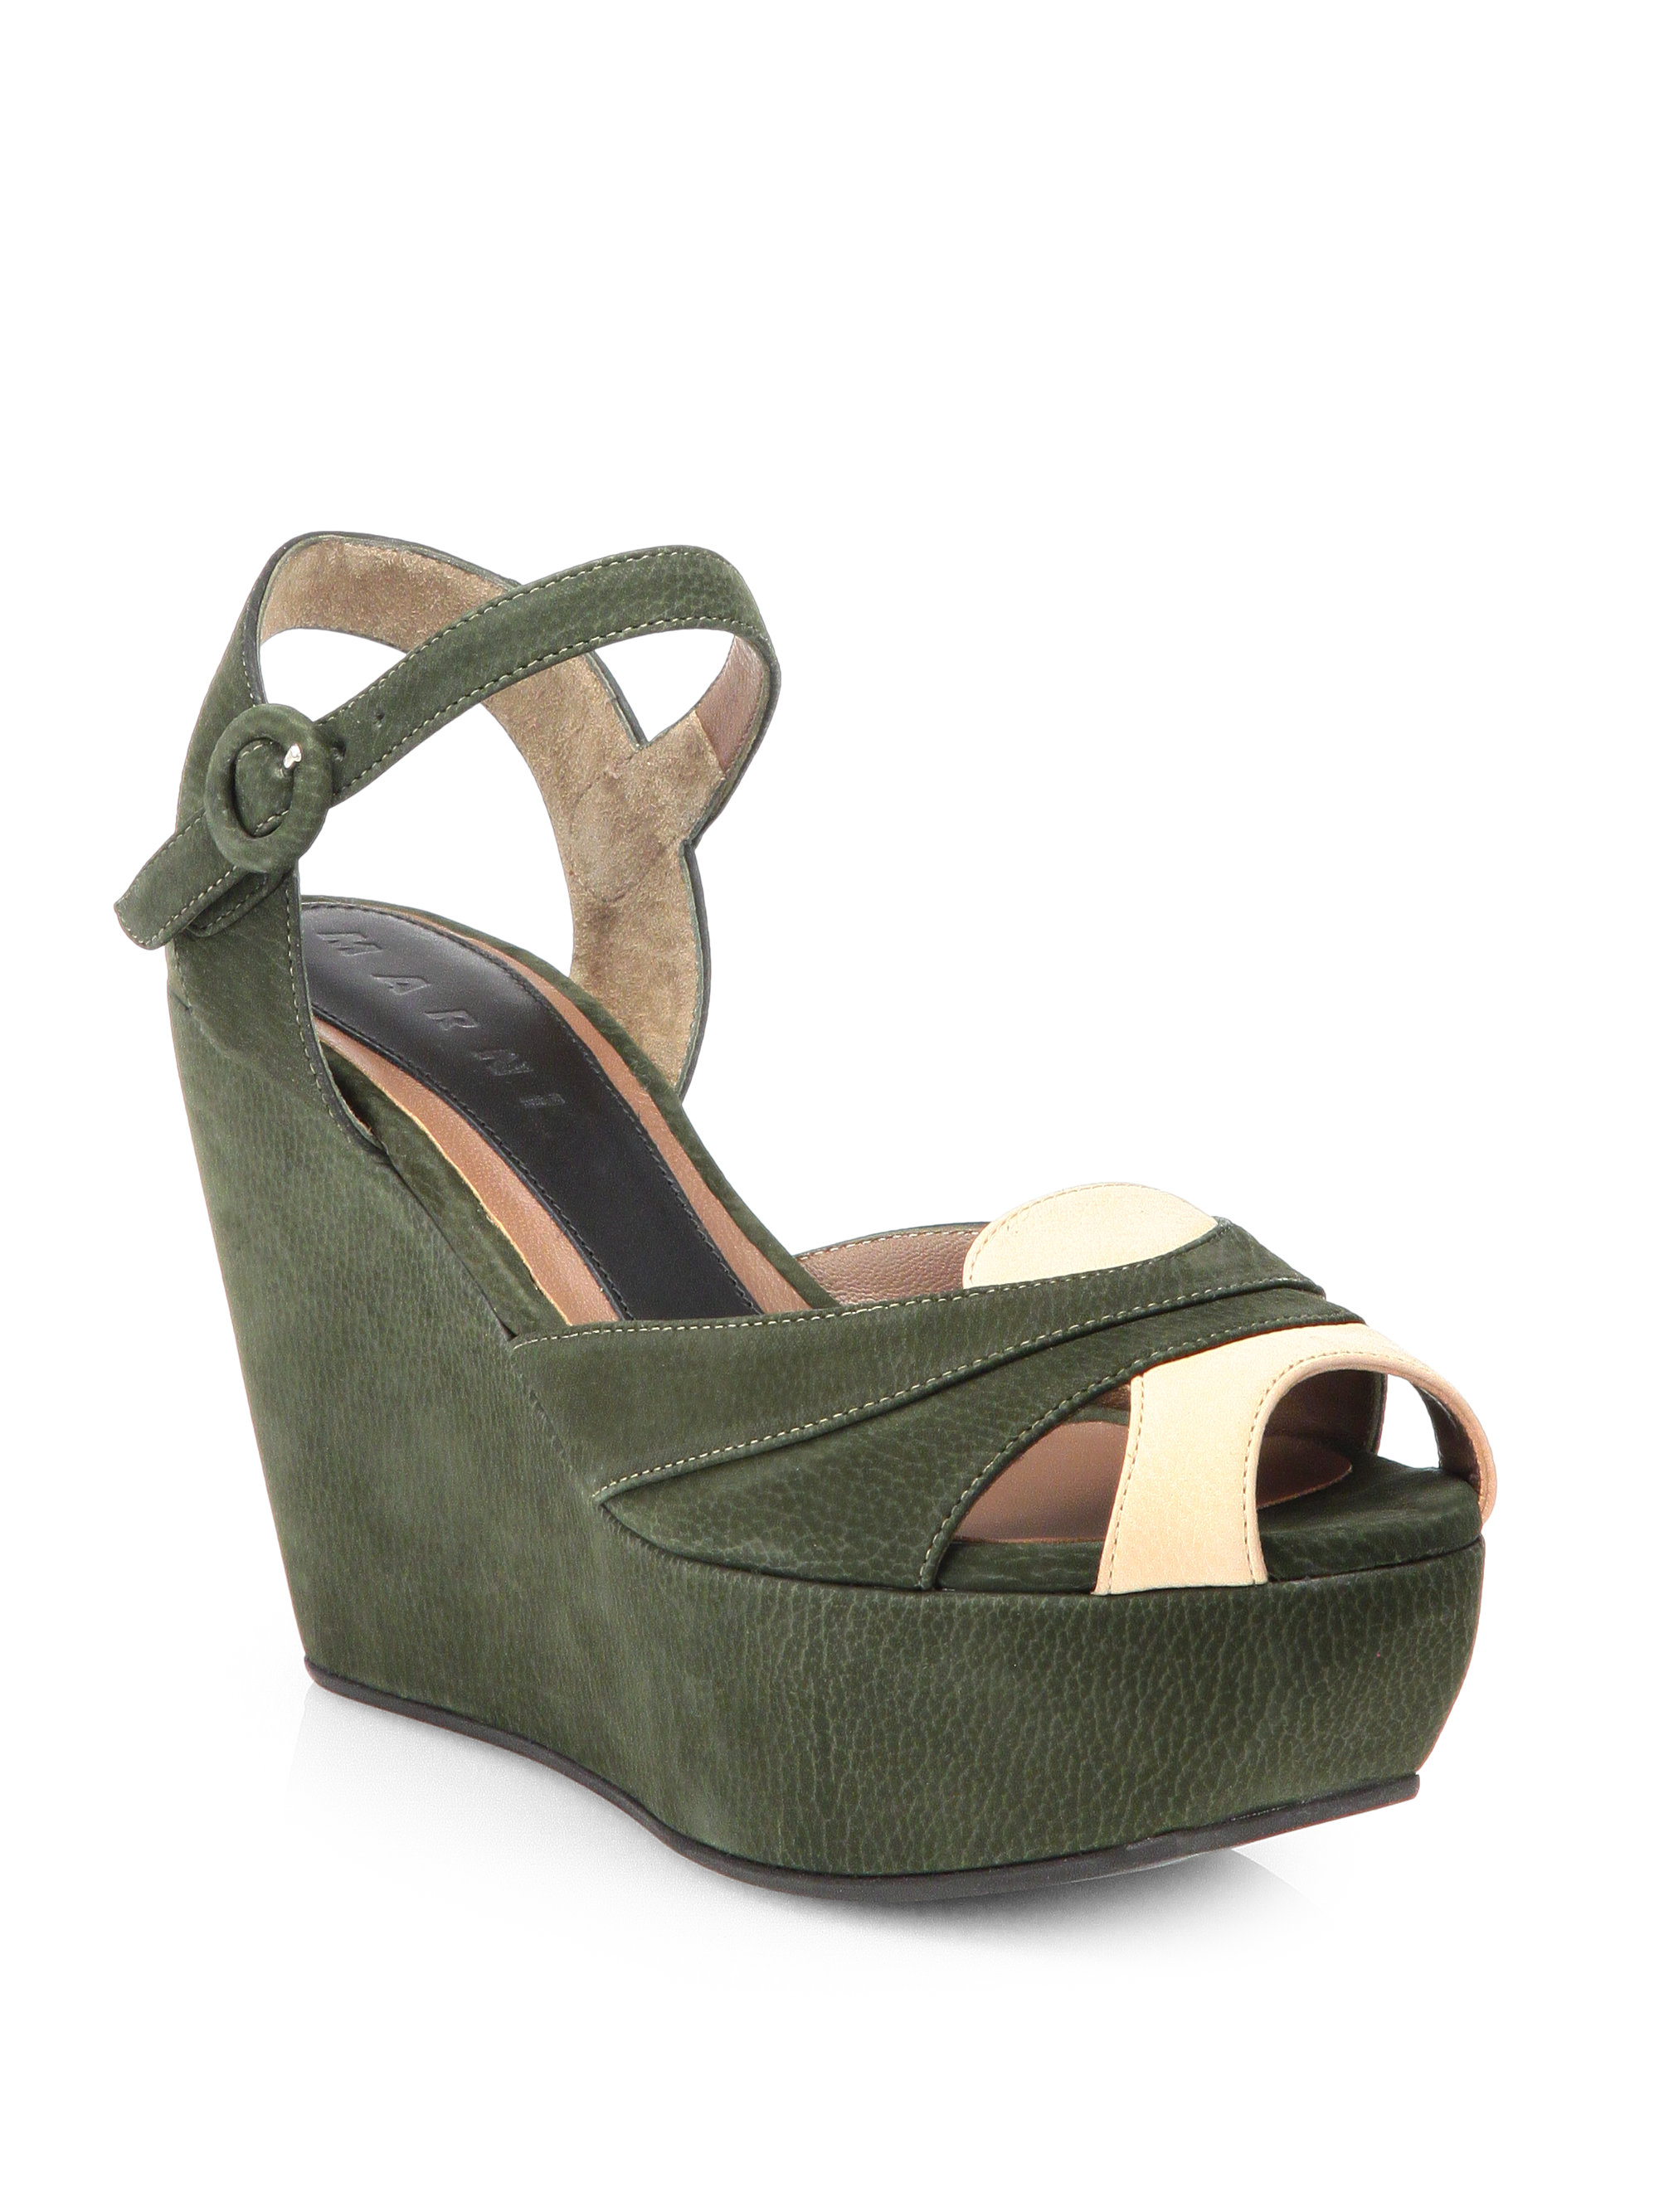 Marni Mary Jane Wedge Sandals in Green | Lyst